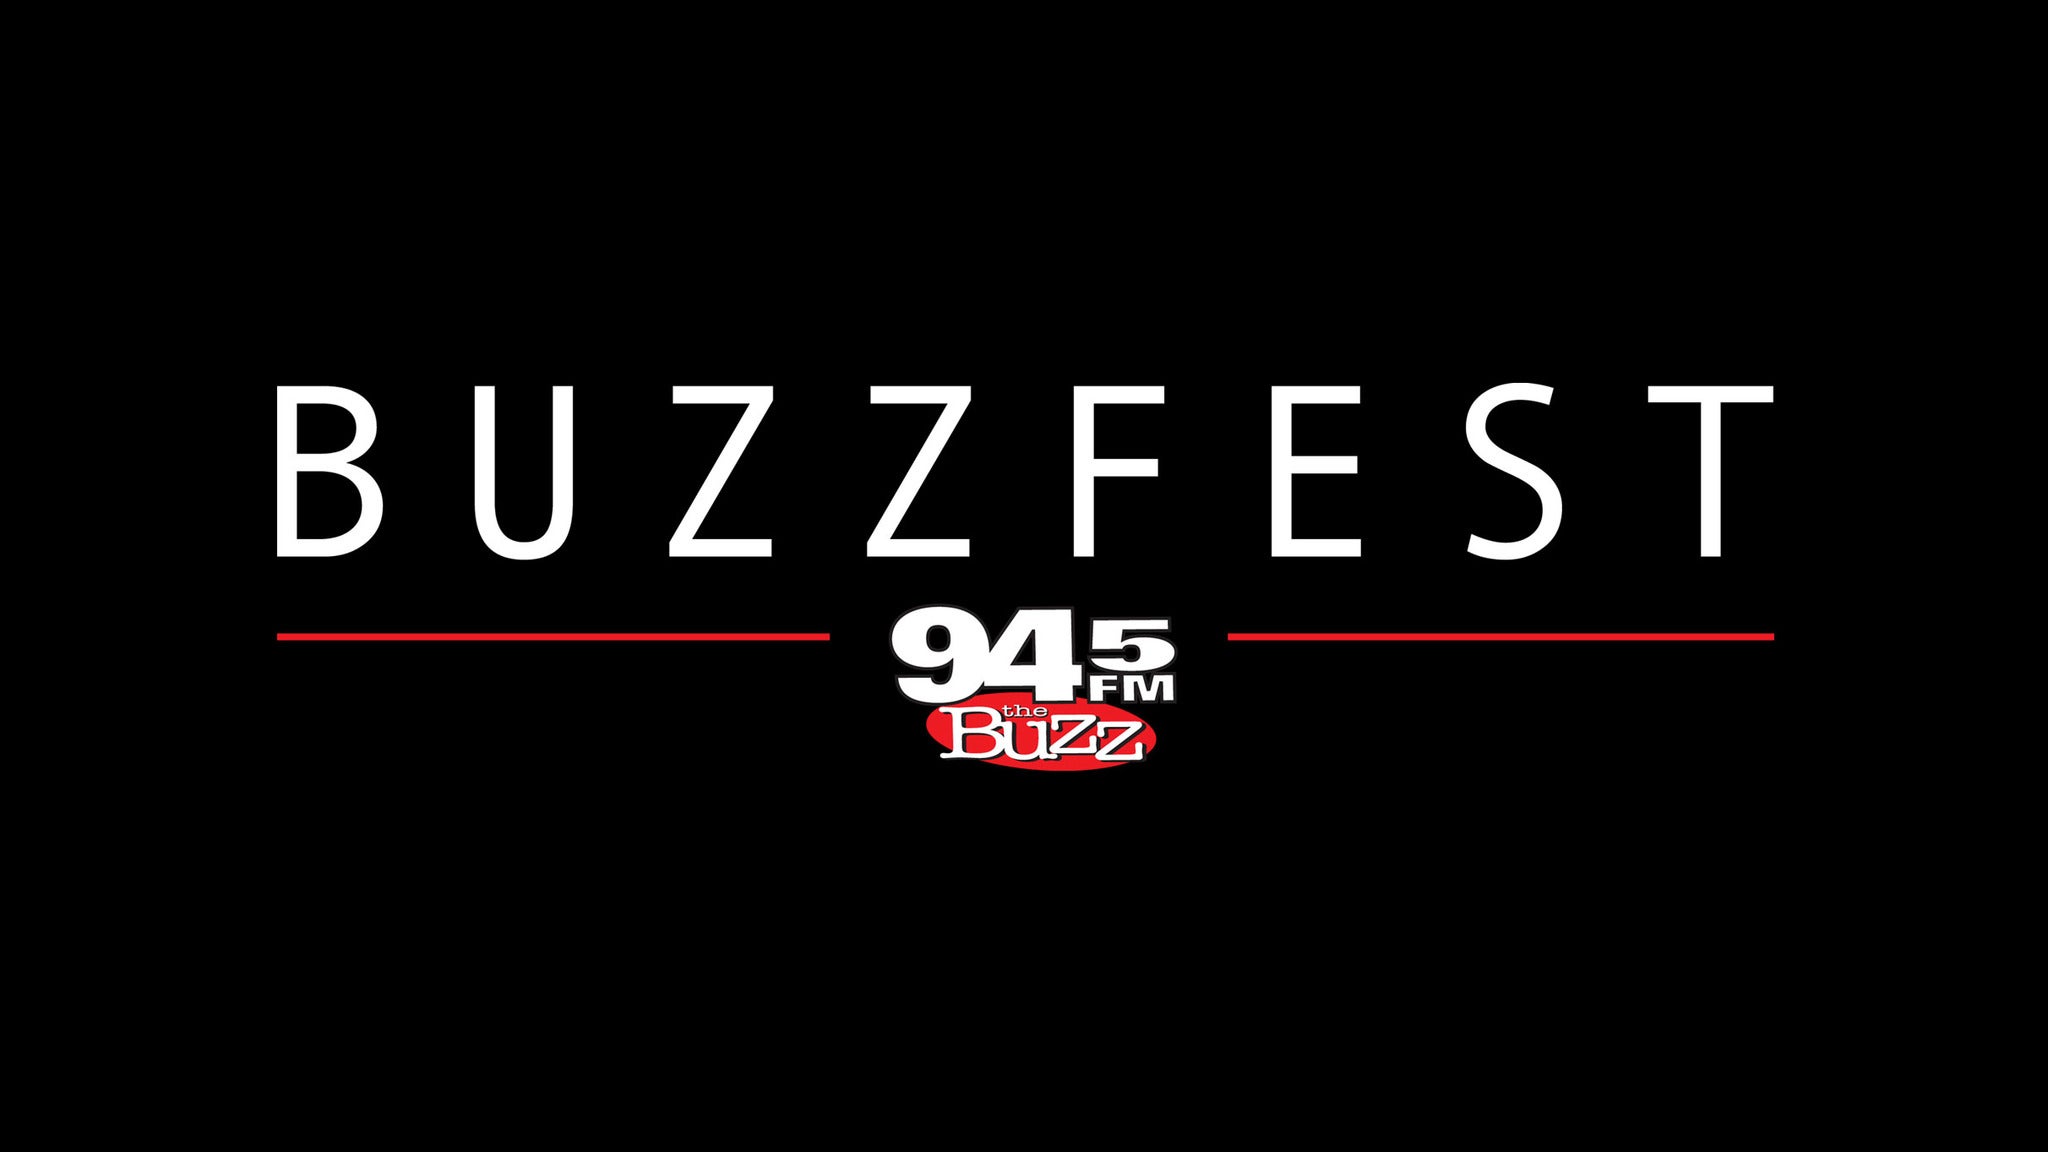 94.50 The Buzz  Buzzfest in Woodlands promo photo for Official Platinum presale offer code